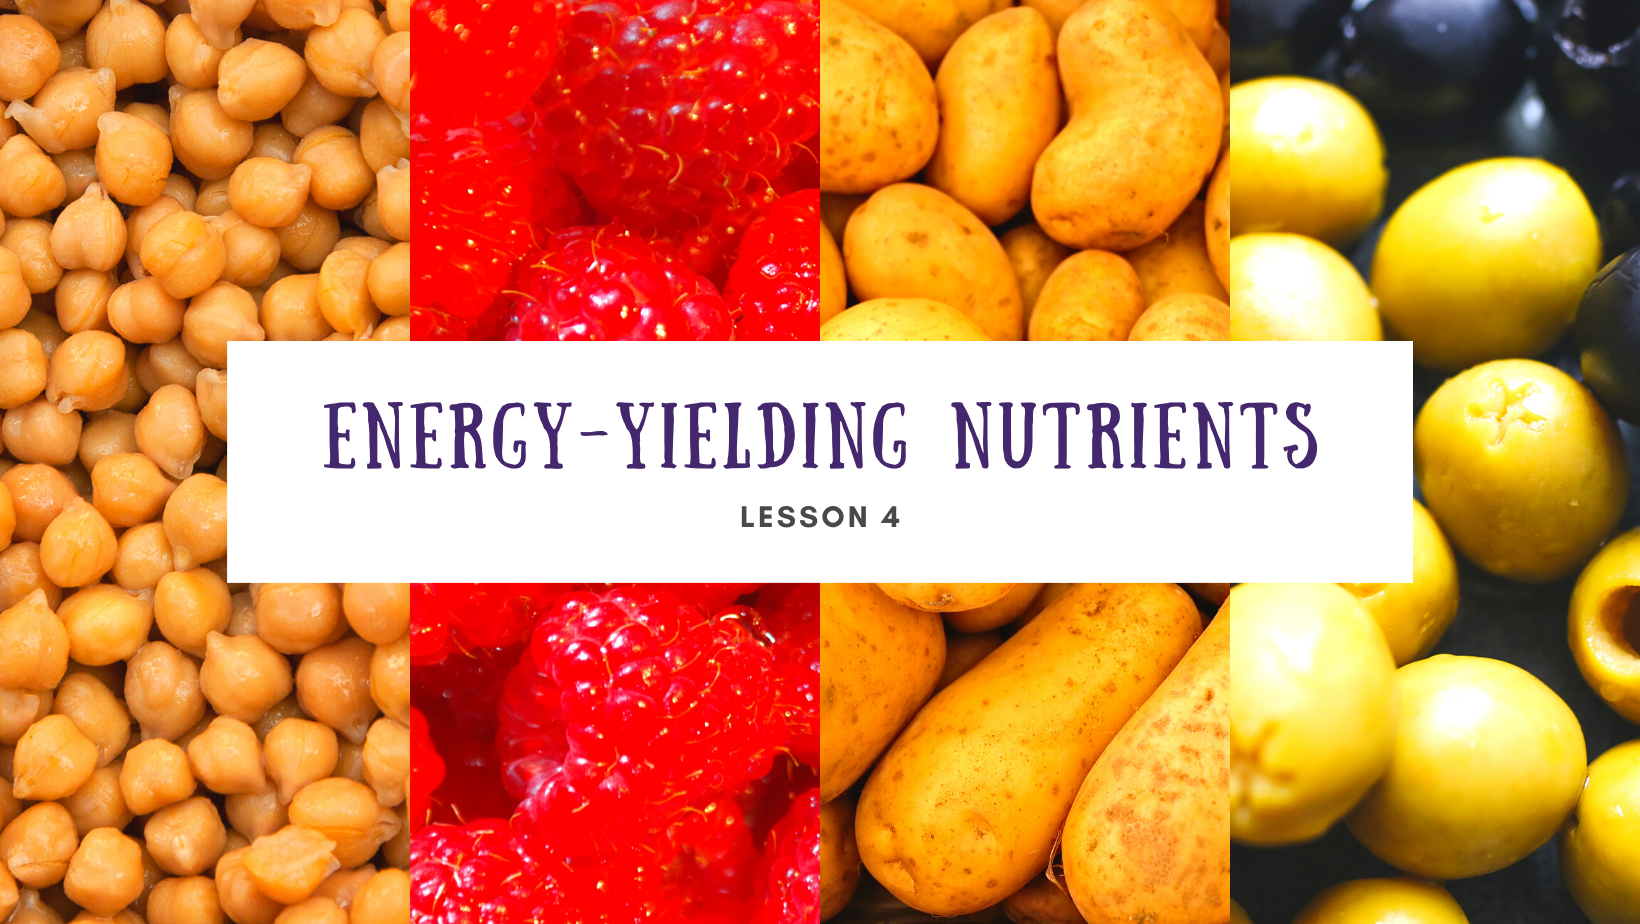 Lesson 4 Energy-yielding nutrients